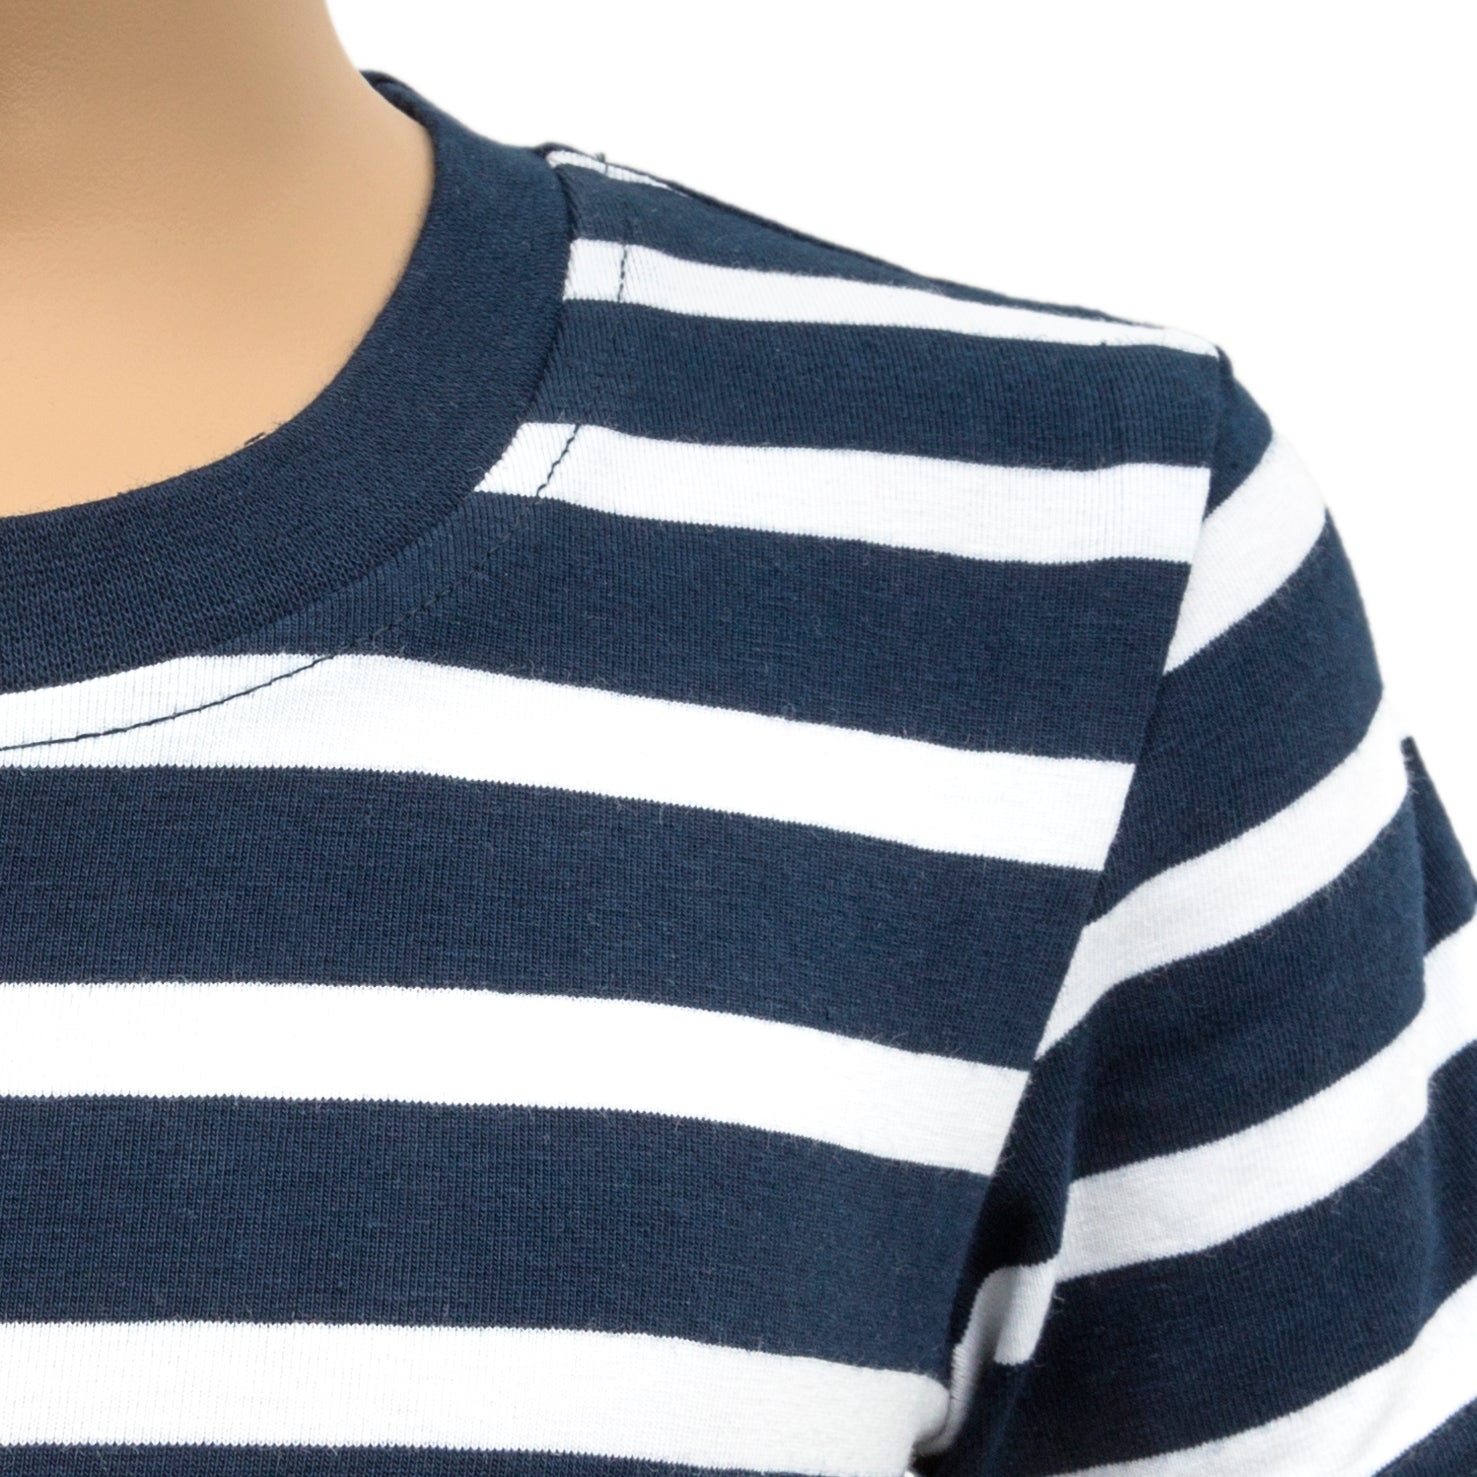 KayCey_Adaptive_clothing_for_older_children_with_special_needs_Short_Sleeve_Navy_white_stripe_shoulder